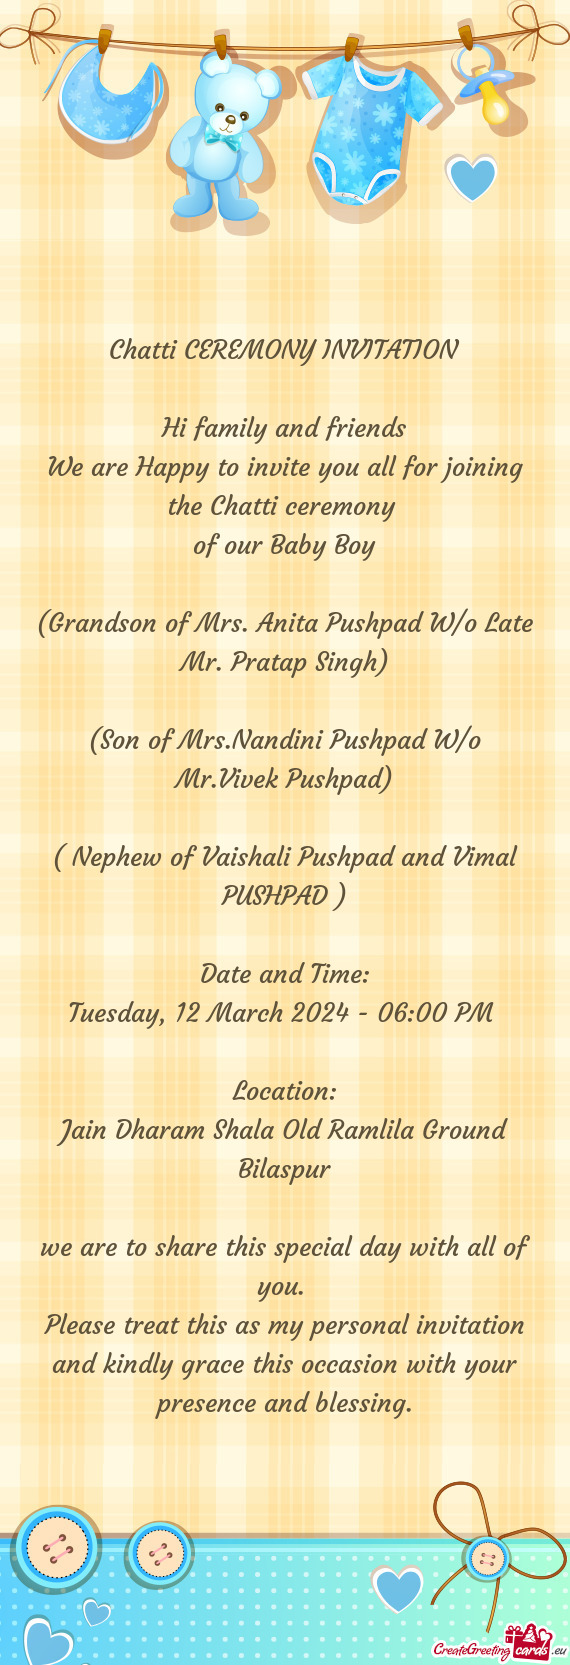 We are Happy to invite you all for joining the Chatti ceremony